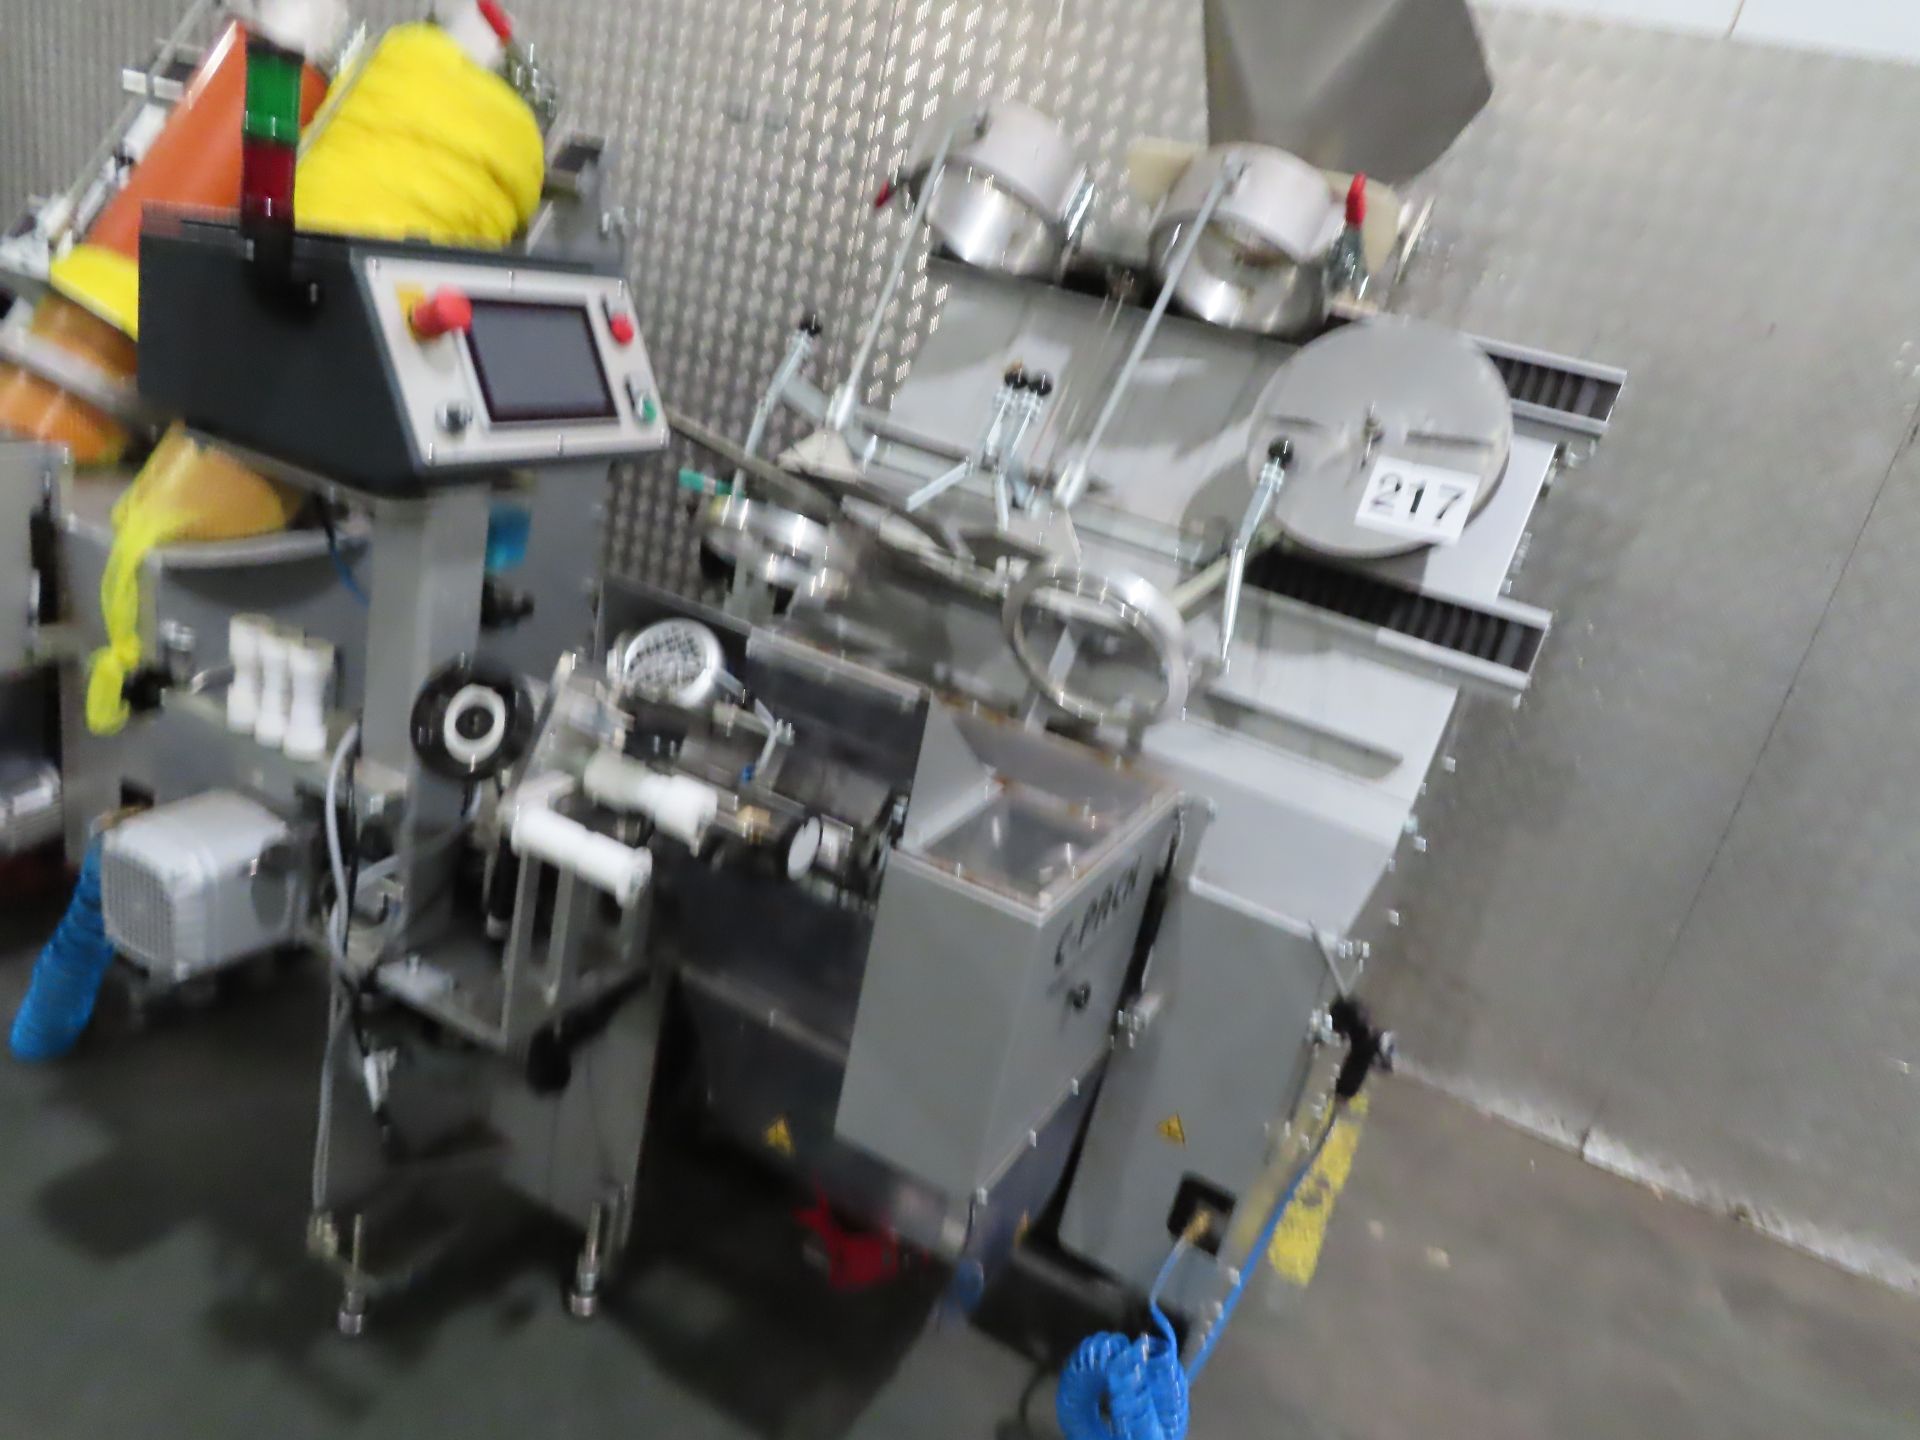 C-PACK 2021 FULLY AUTOMATIC NETTING MACHINE. (will come with tubes) - Image 5 of 5